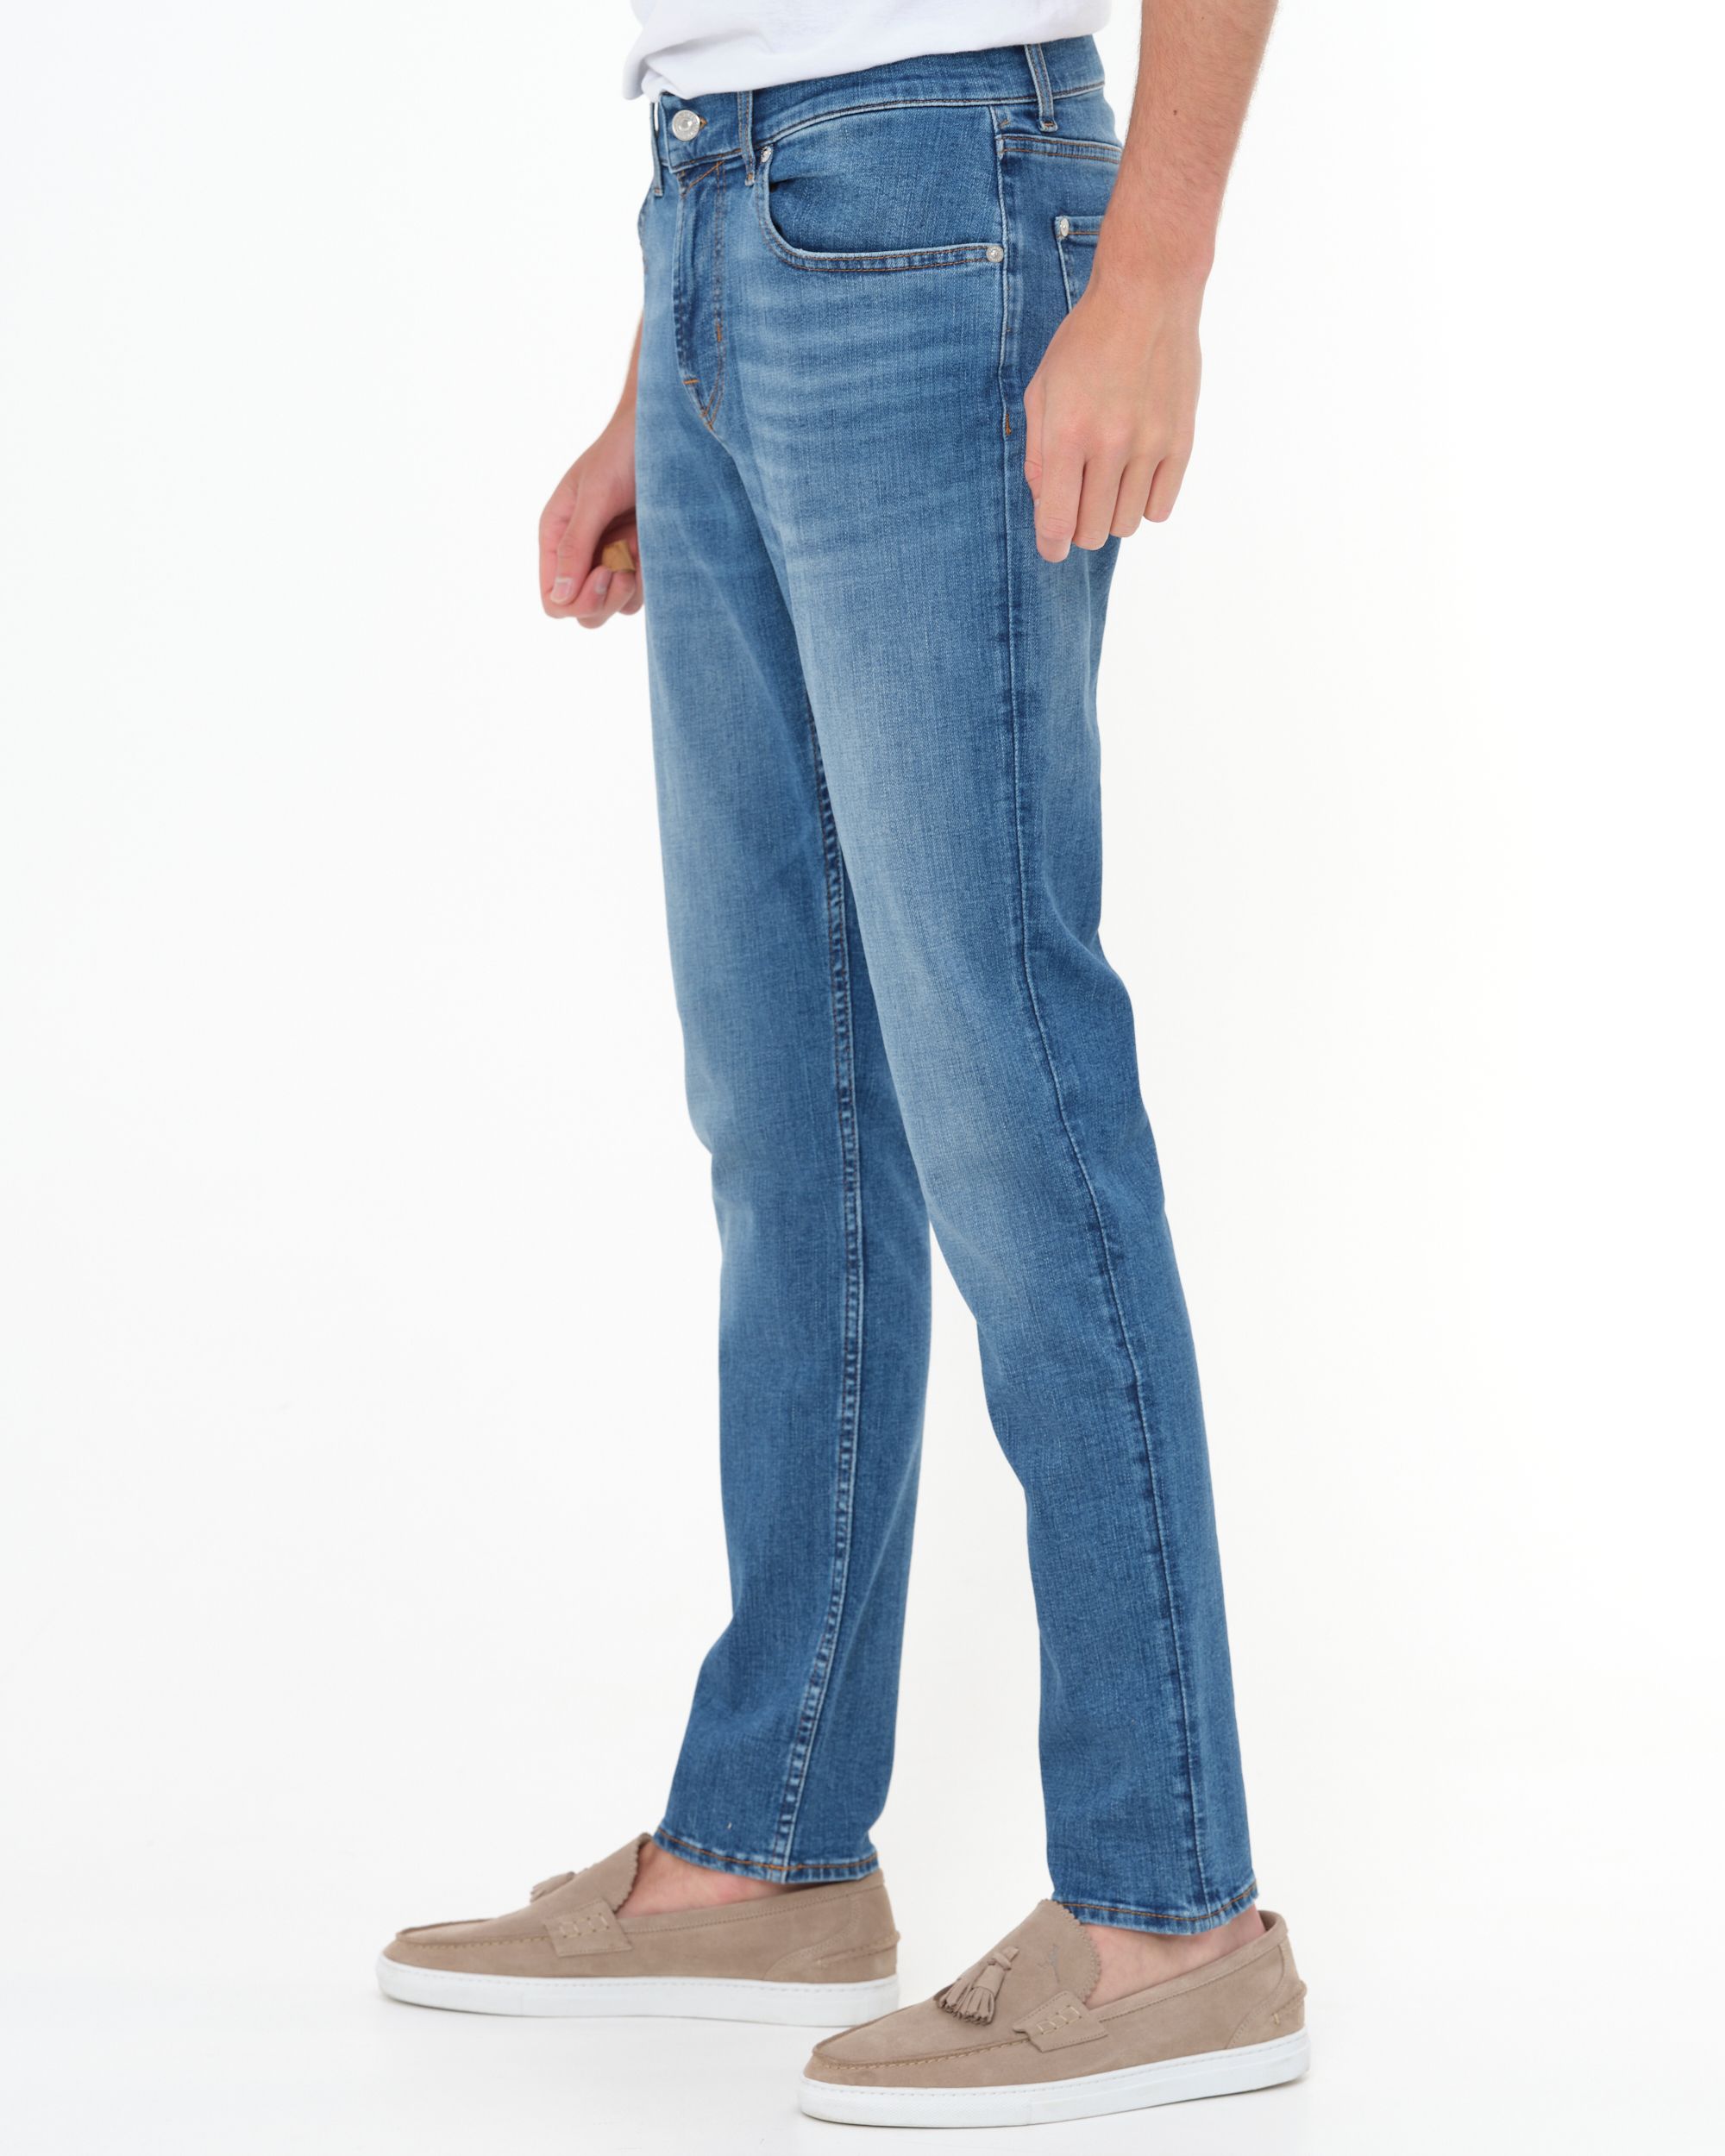 Seven for all Mankind Jeans Blauw 081444-001-30